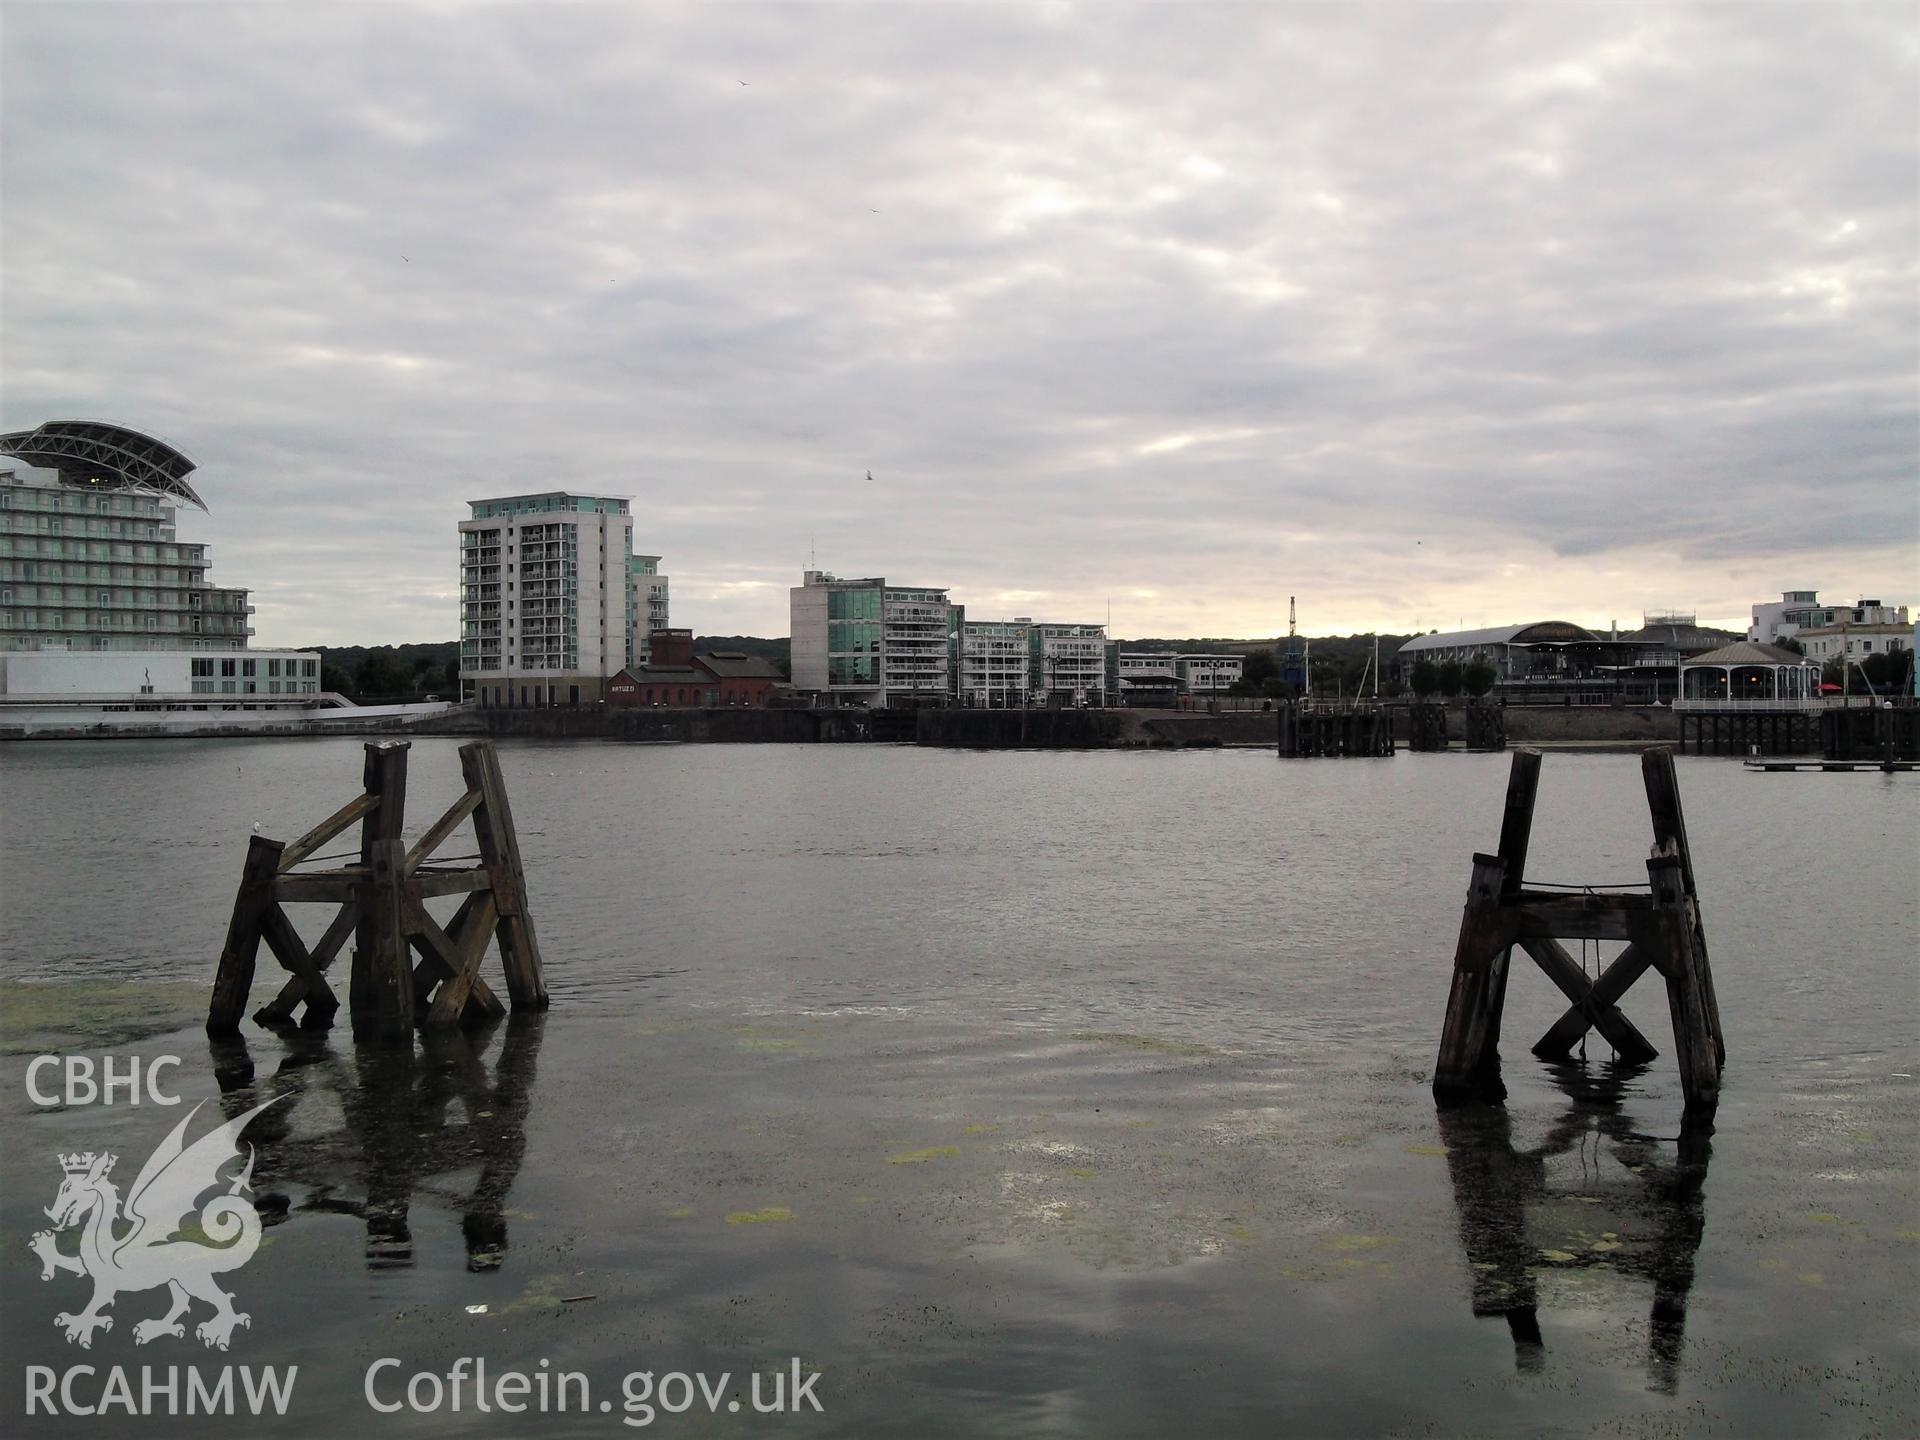 Colour photograph showing exterior of 'the Dolphins' (Jetty) at the Inner Harbour, Butetown, Cardiff. Photographed during survey conducted by Adam N. Coward on 17th July 2018.